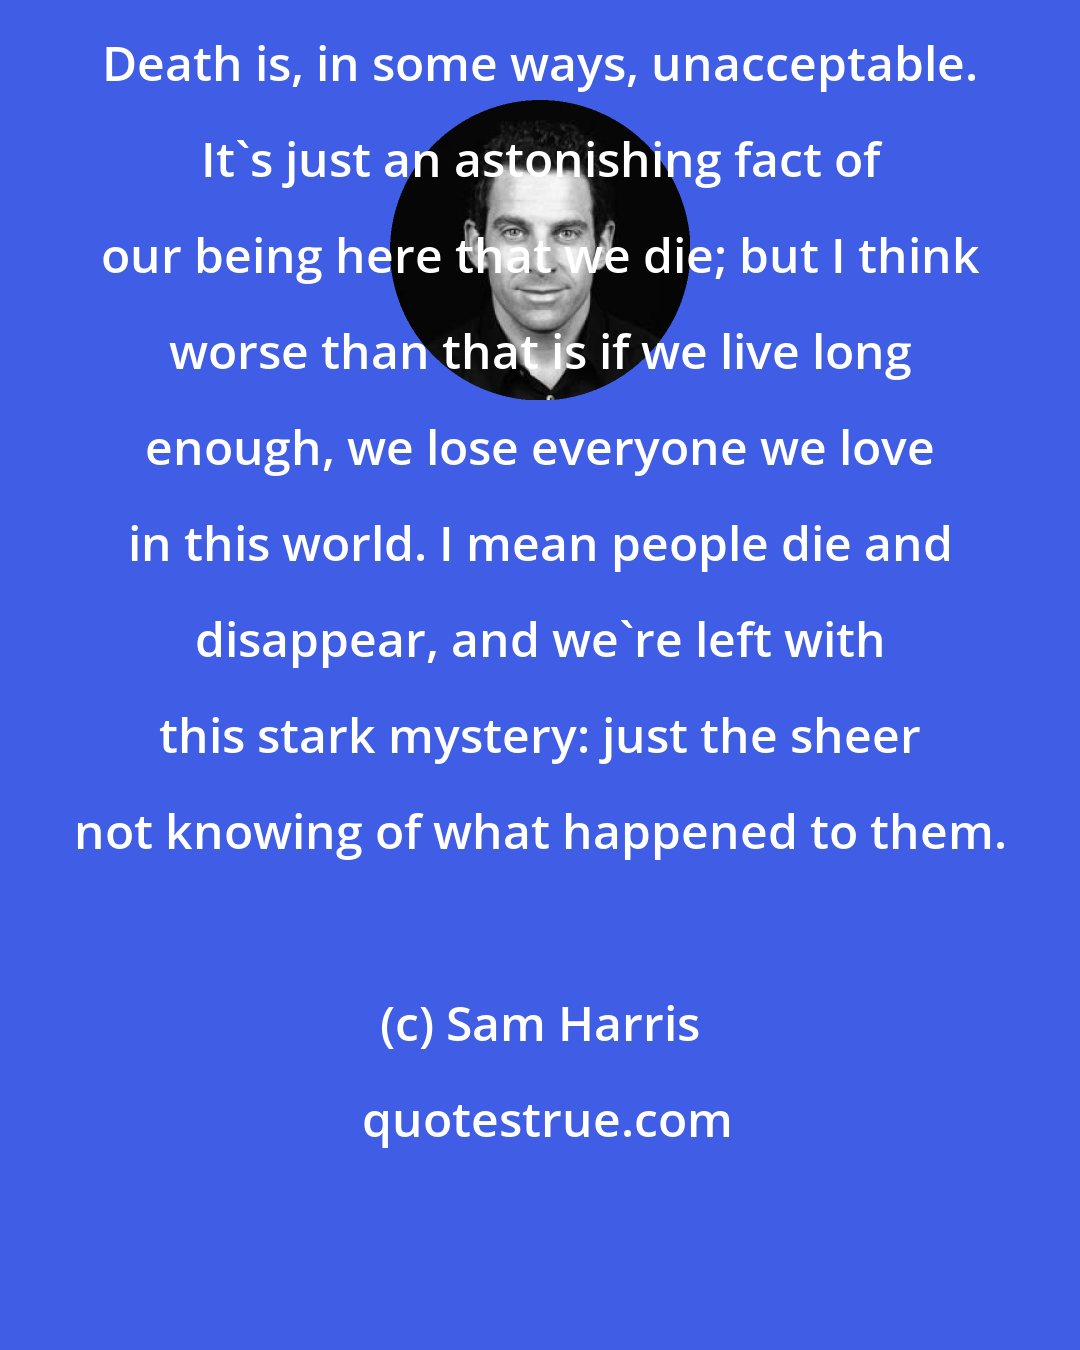 Sam Harris: Death is, in some ways, unacceptable. It's just an astonishing fact of our being here that we die; but I think worse than that is if we live long enough, we lose everyone we love in this world. I mean people die and disappear, and we're left with this stark mystery: just the sheer not knowing of what happened to them.